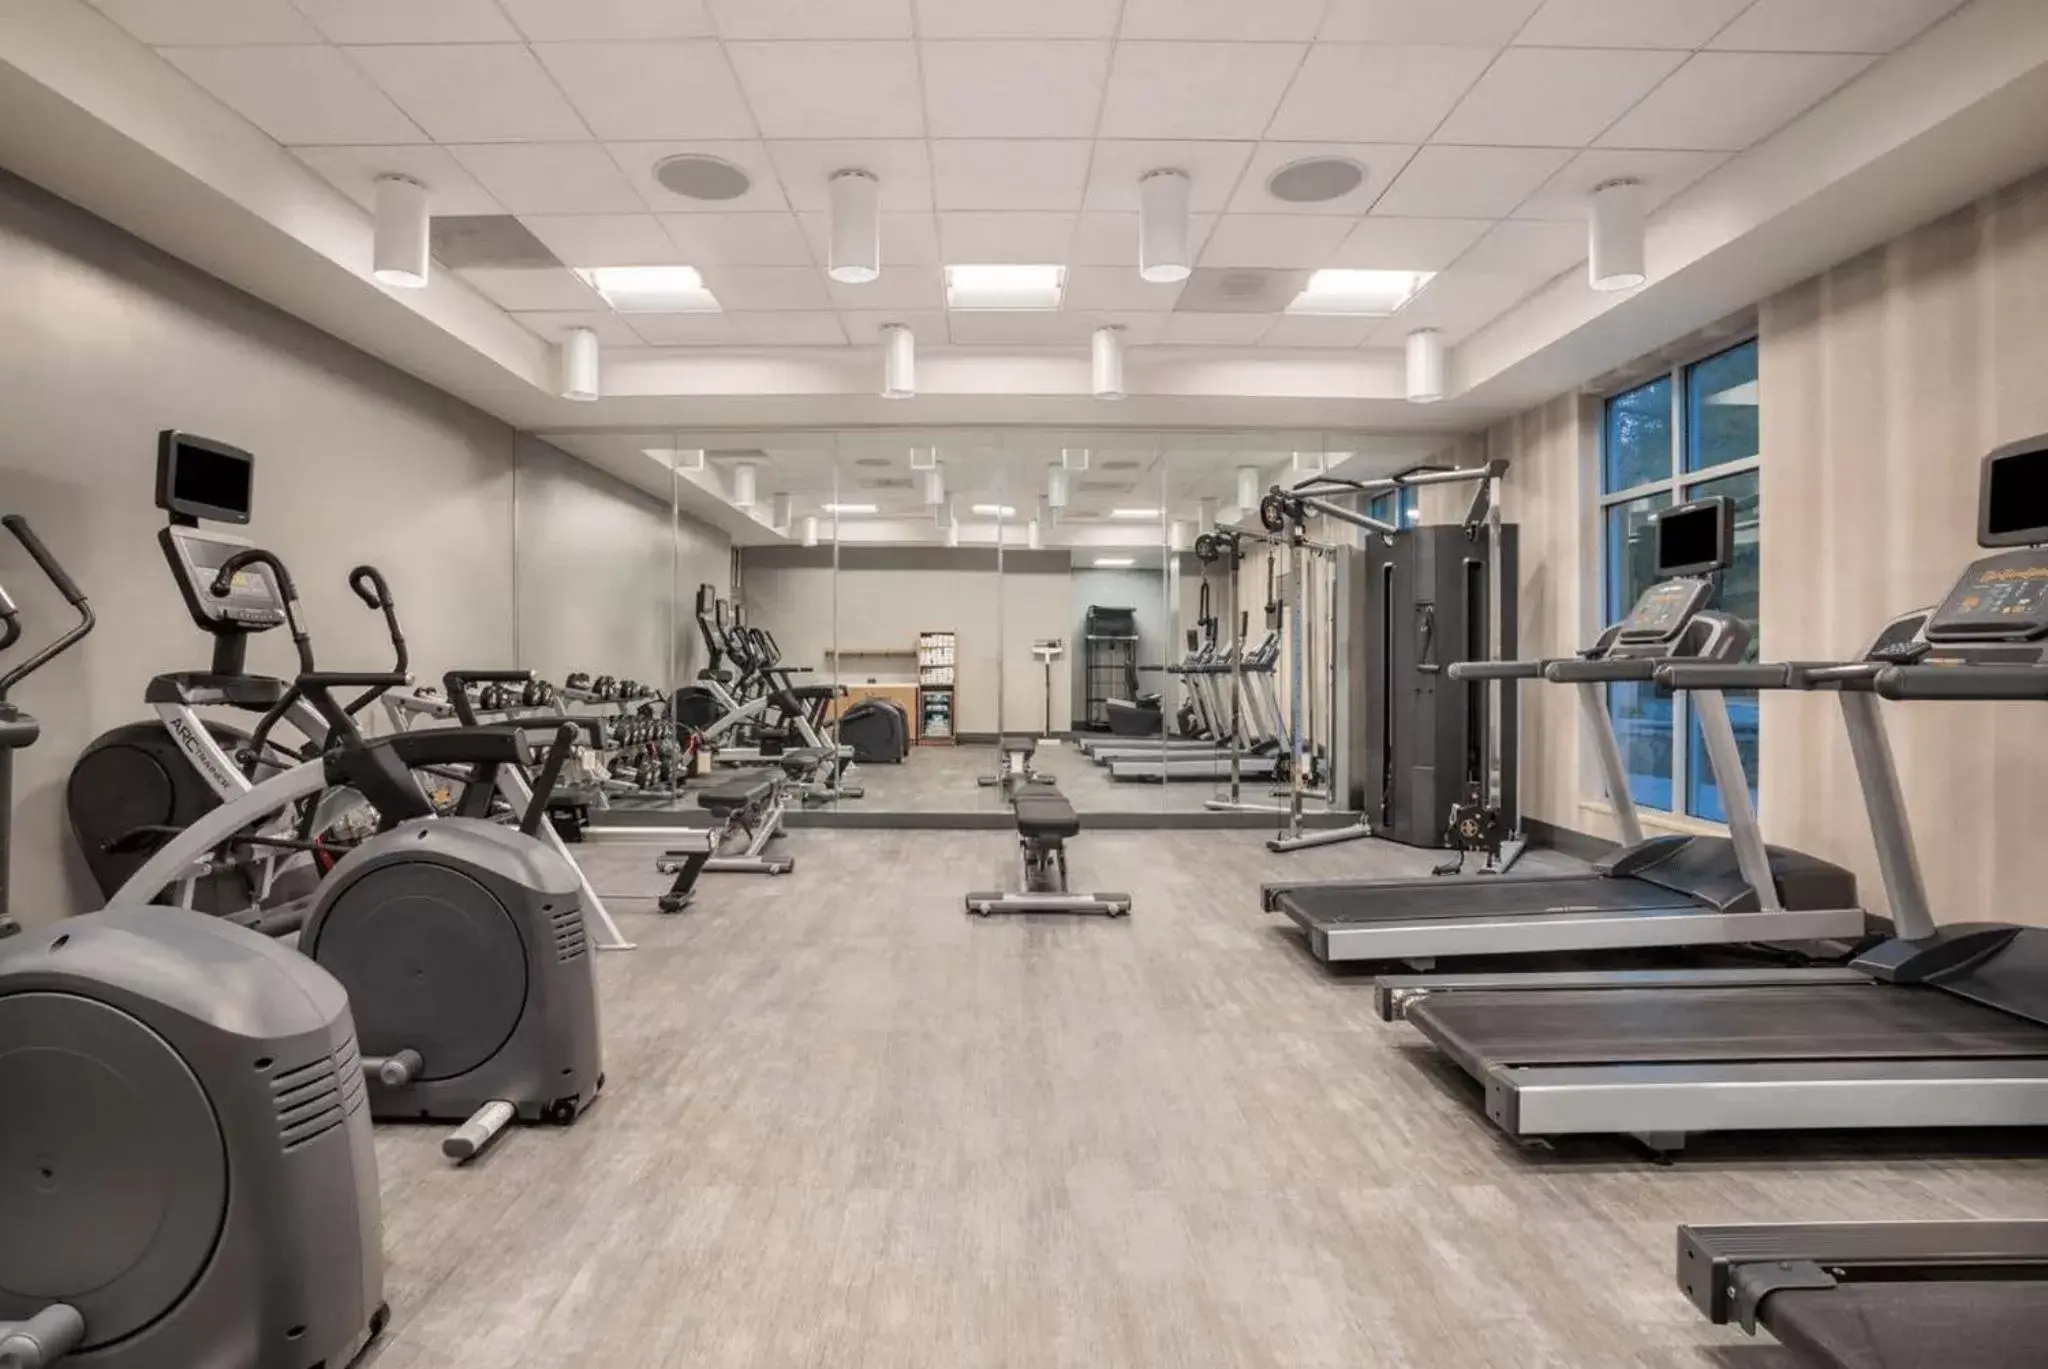 Fitness centre/facilities, Fitness Center/Facilities in Crowne Plaza Shenandoah - The Woodlands